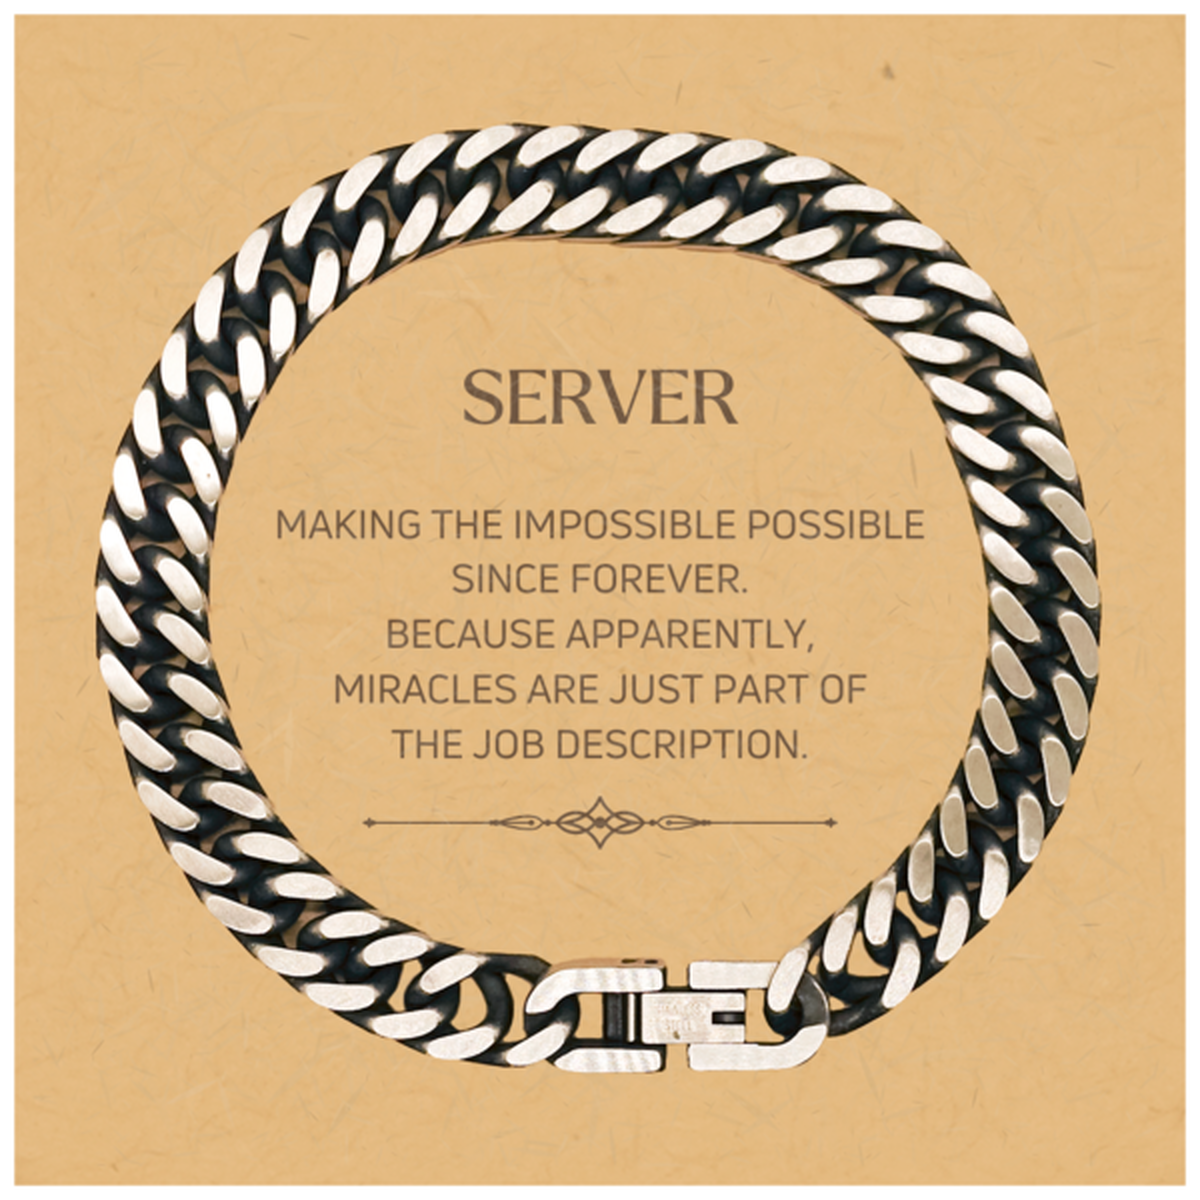 Funny Server Gifts, Miracles are just part of the job description, Inspirational Birthday Christmas Cuban Link Chain Bracelet For Server, Men, Women, Coworkers, Friends, Boss